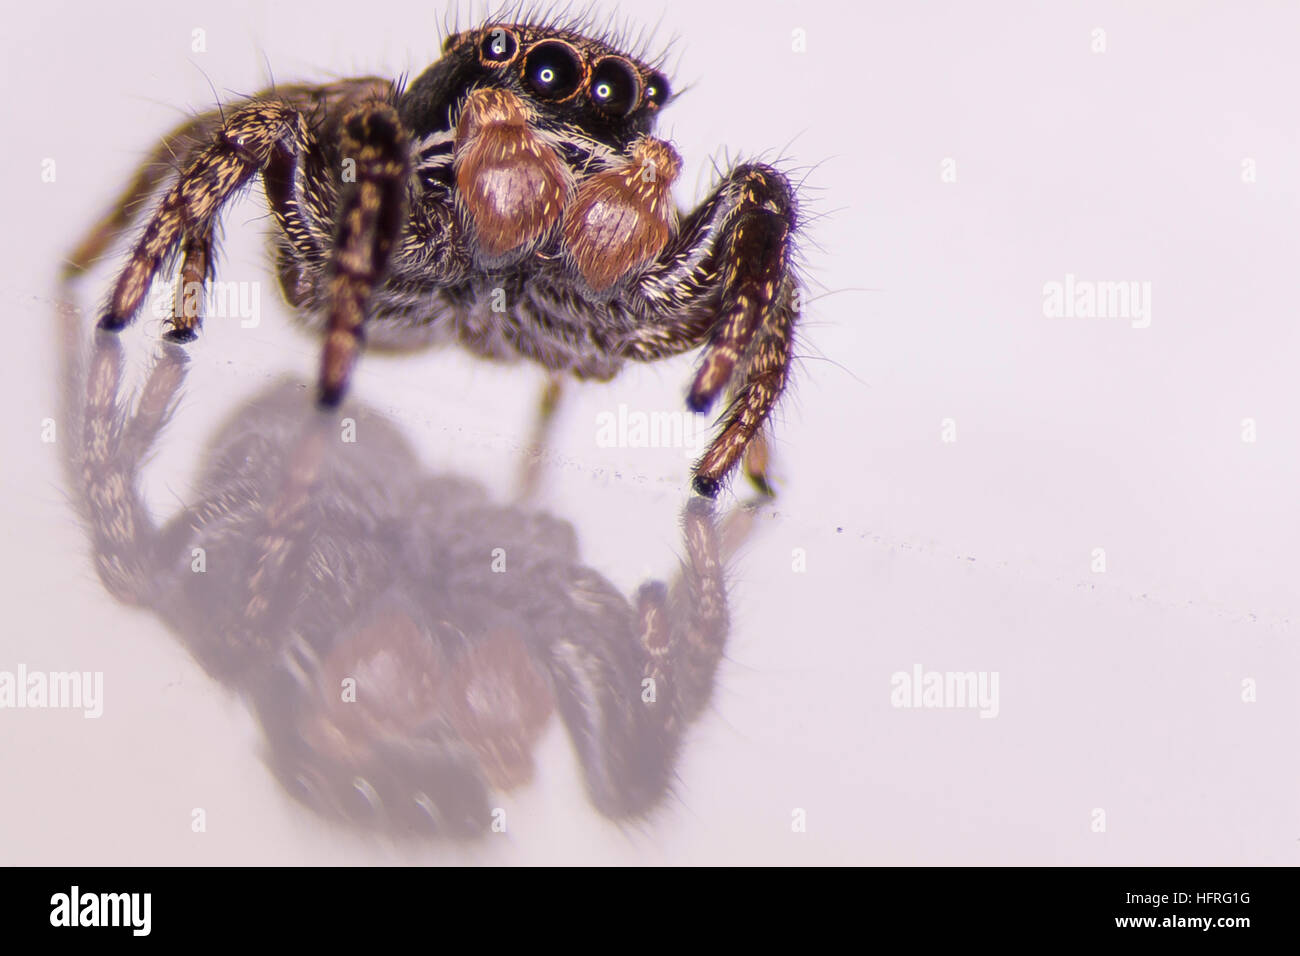 Male penultimate instar of Habronattus oregonensis (a jumping spider). The palps are swollen and will reveal the male's specialized mating structures  Stock Photo